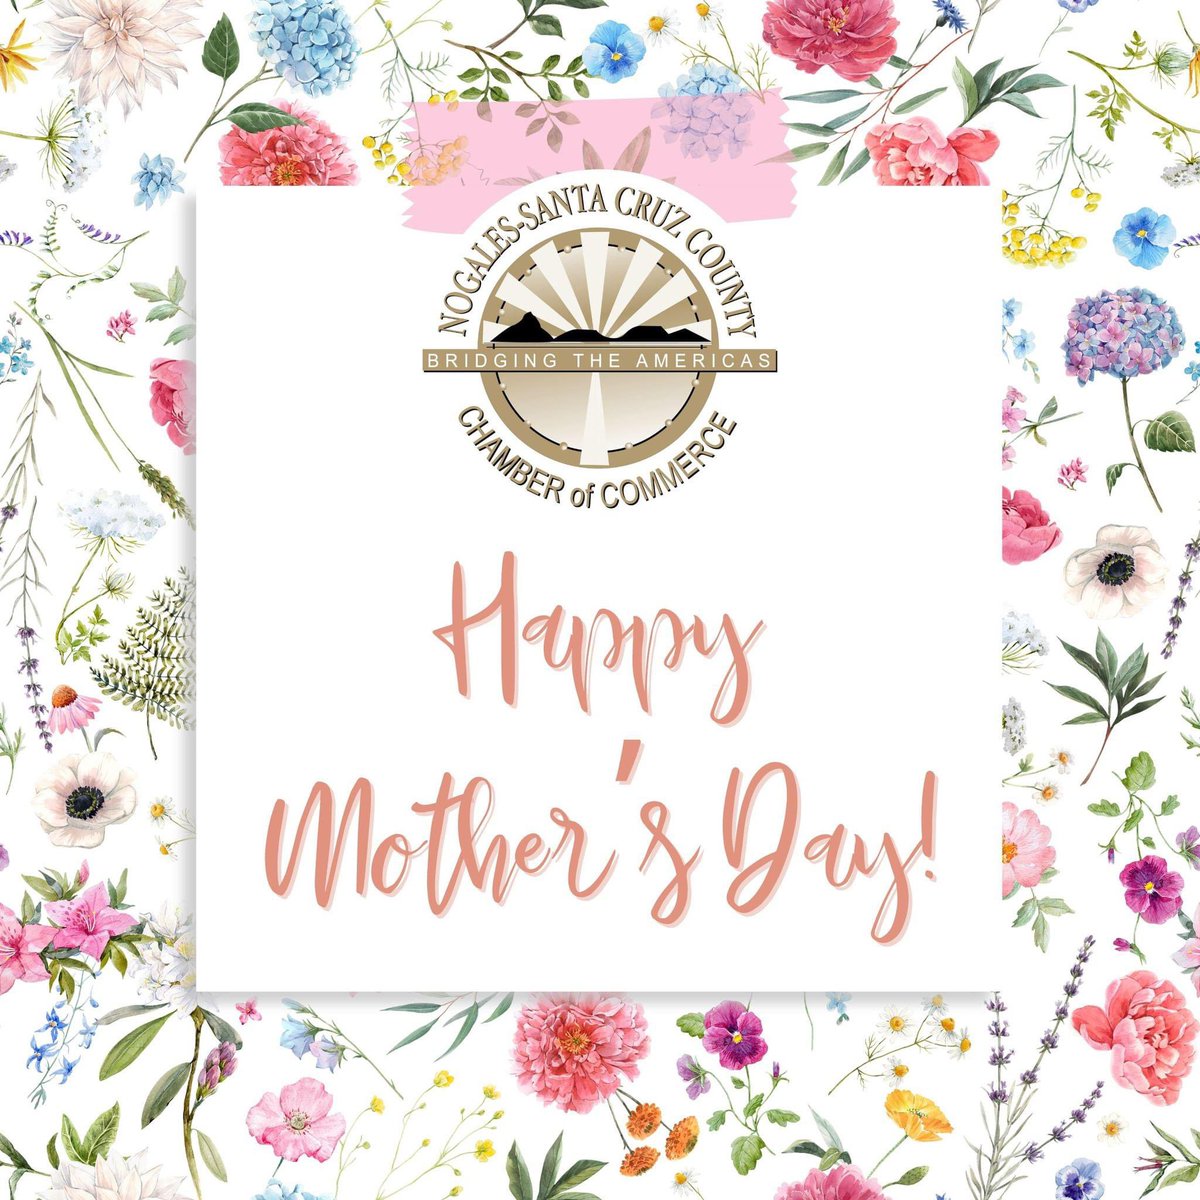 Happy #MothersDay from all of us at the @NogalesChamber! 💐 Today, we celebrate the incredible mothers who enrich our lives with love and wisdom. #MothersDay2024 #NogalesArizona #SouthernArizona